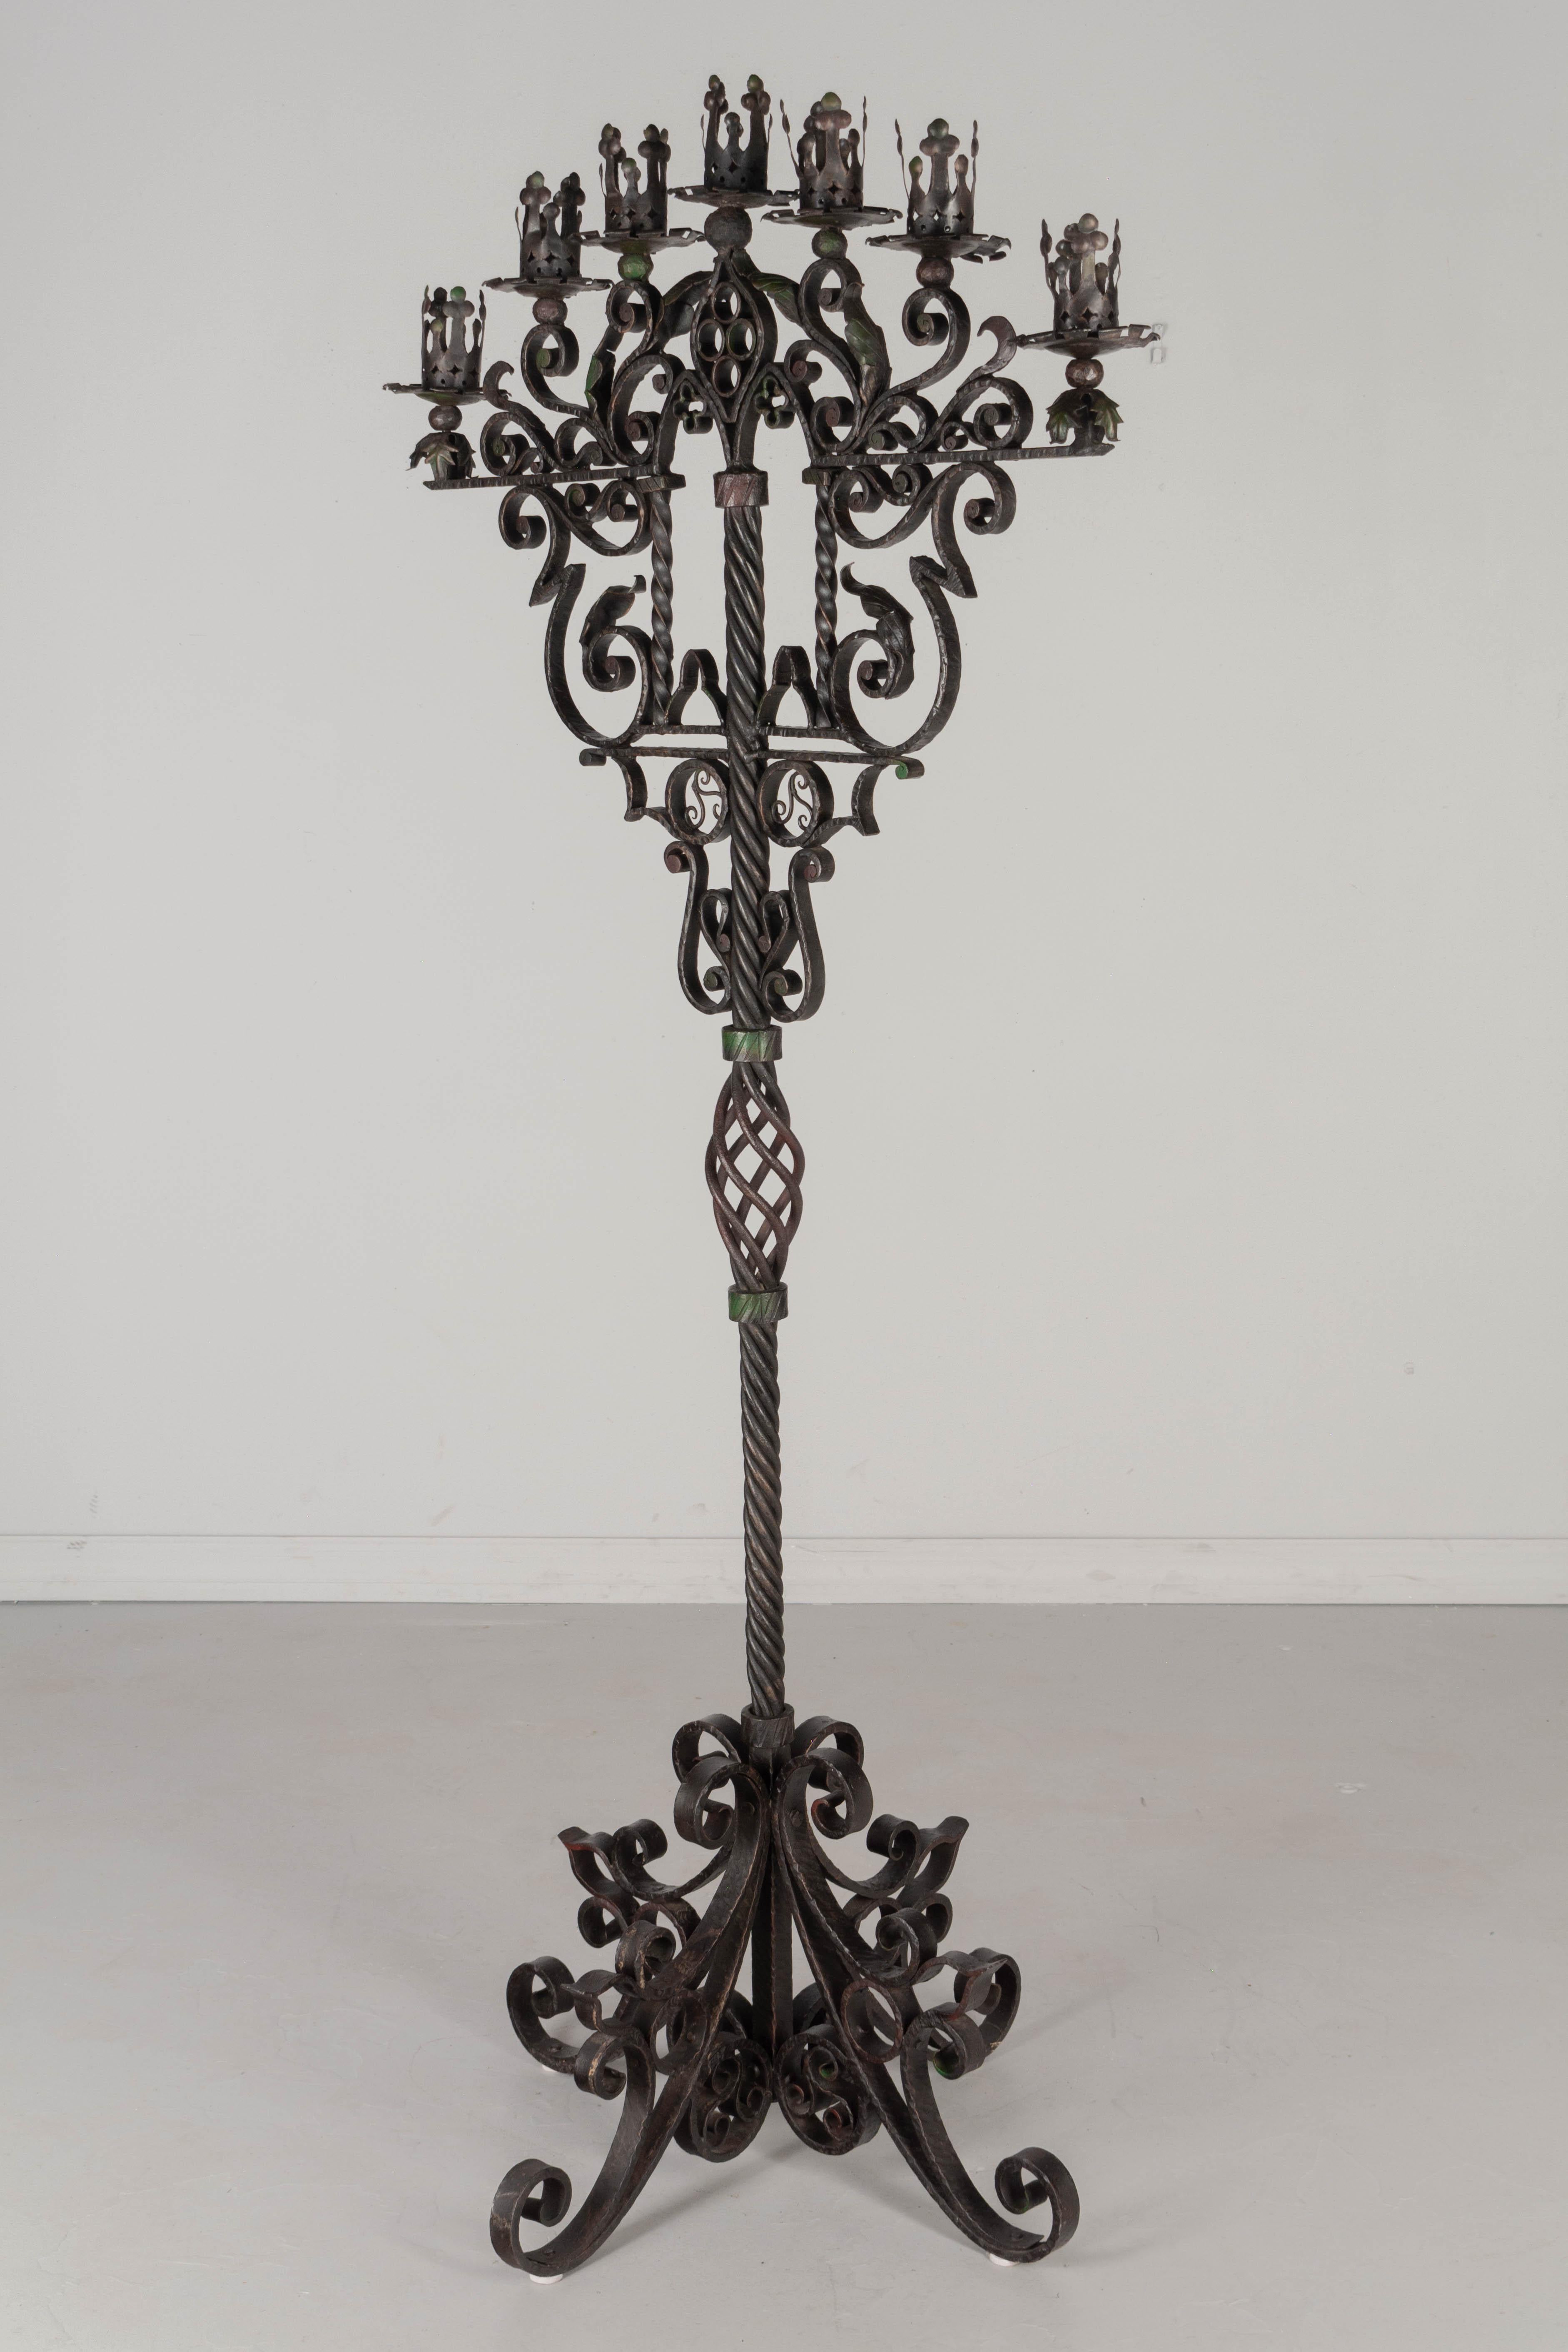 Spanish Baroque Wrought Iron Floor Candelabra In Good Condition For Sale In Winter Park, FL